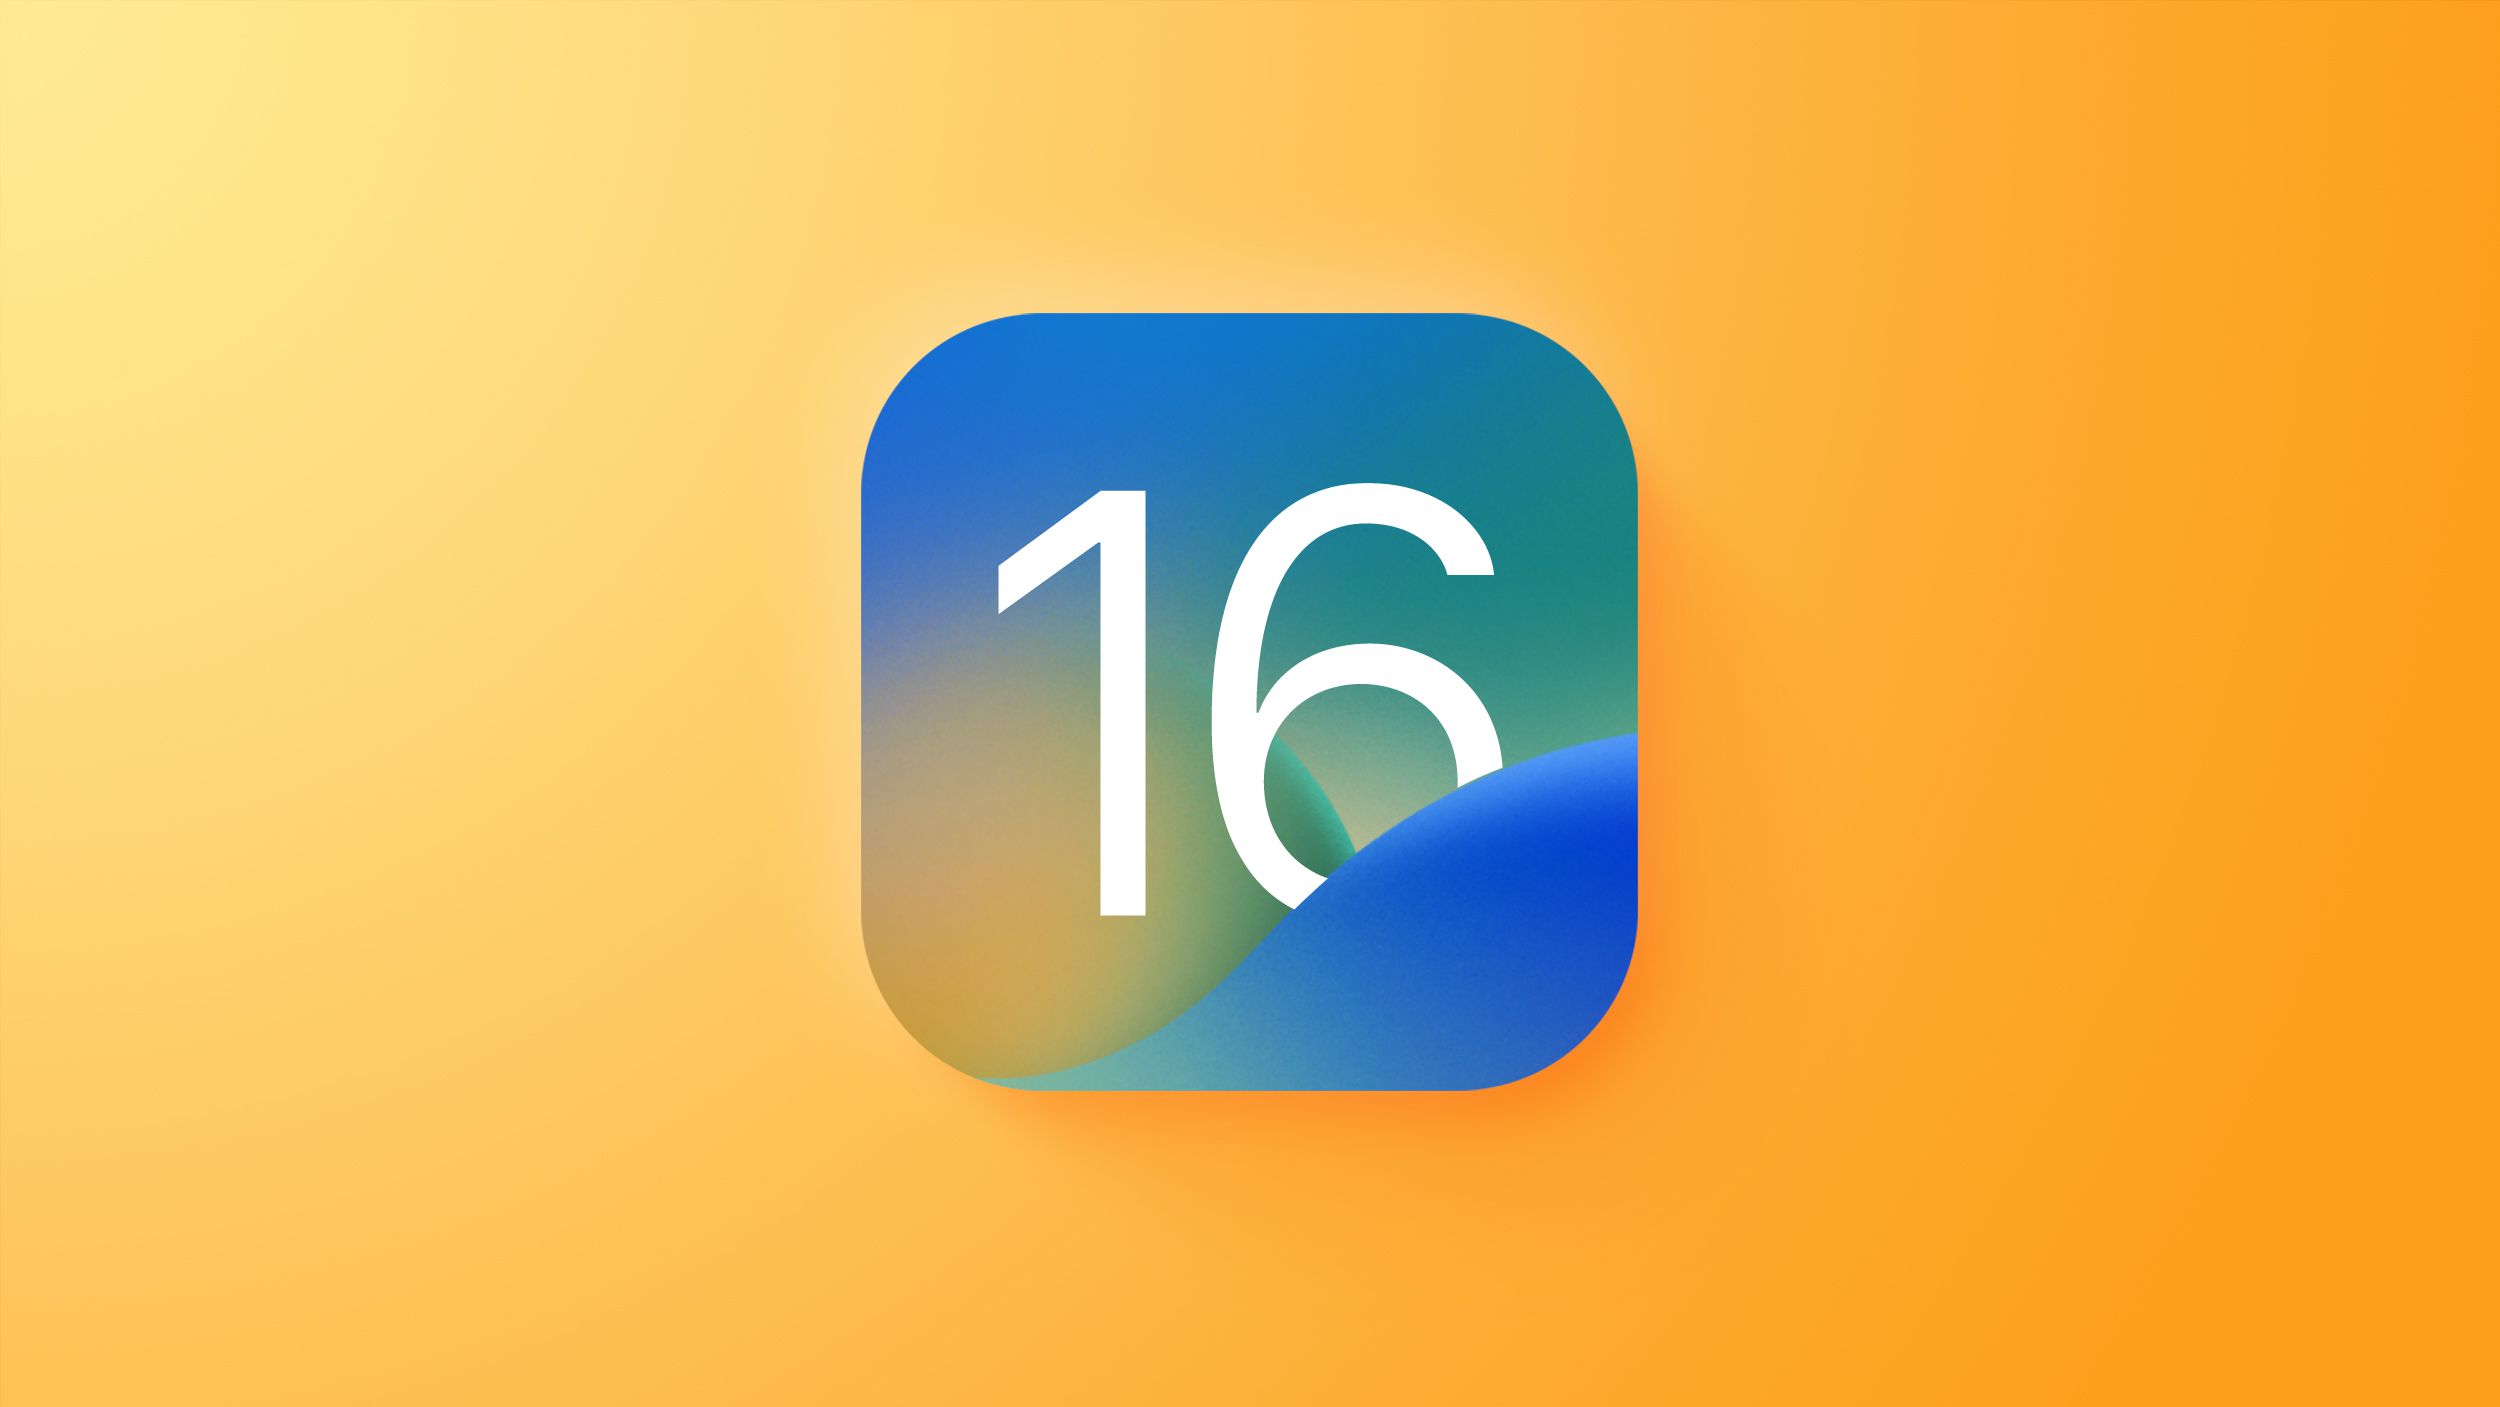 iOS 16.1 for iPhone launched on Monday with these 8 new features